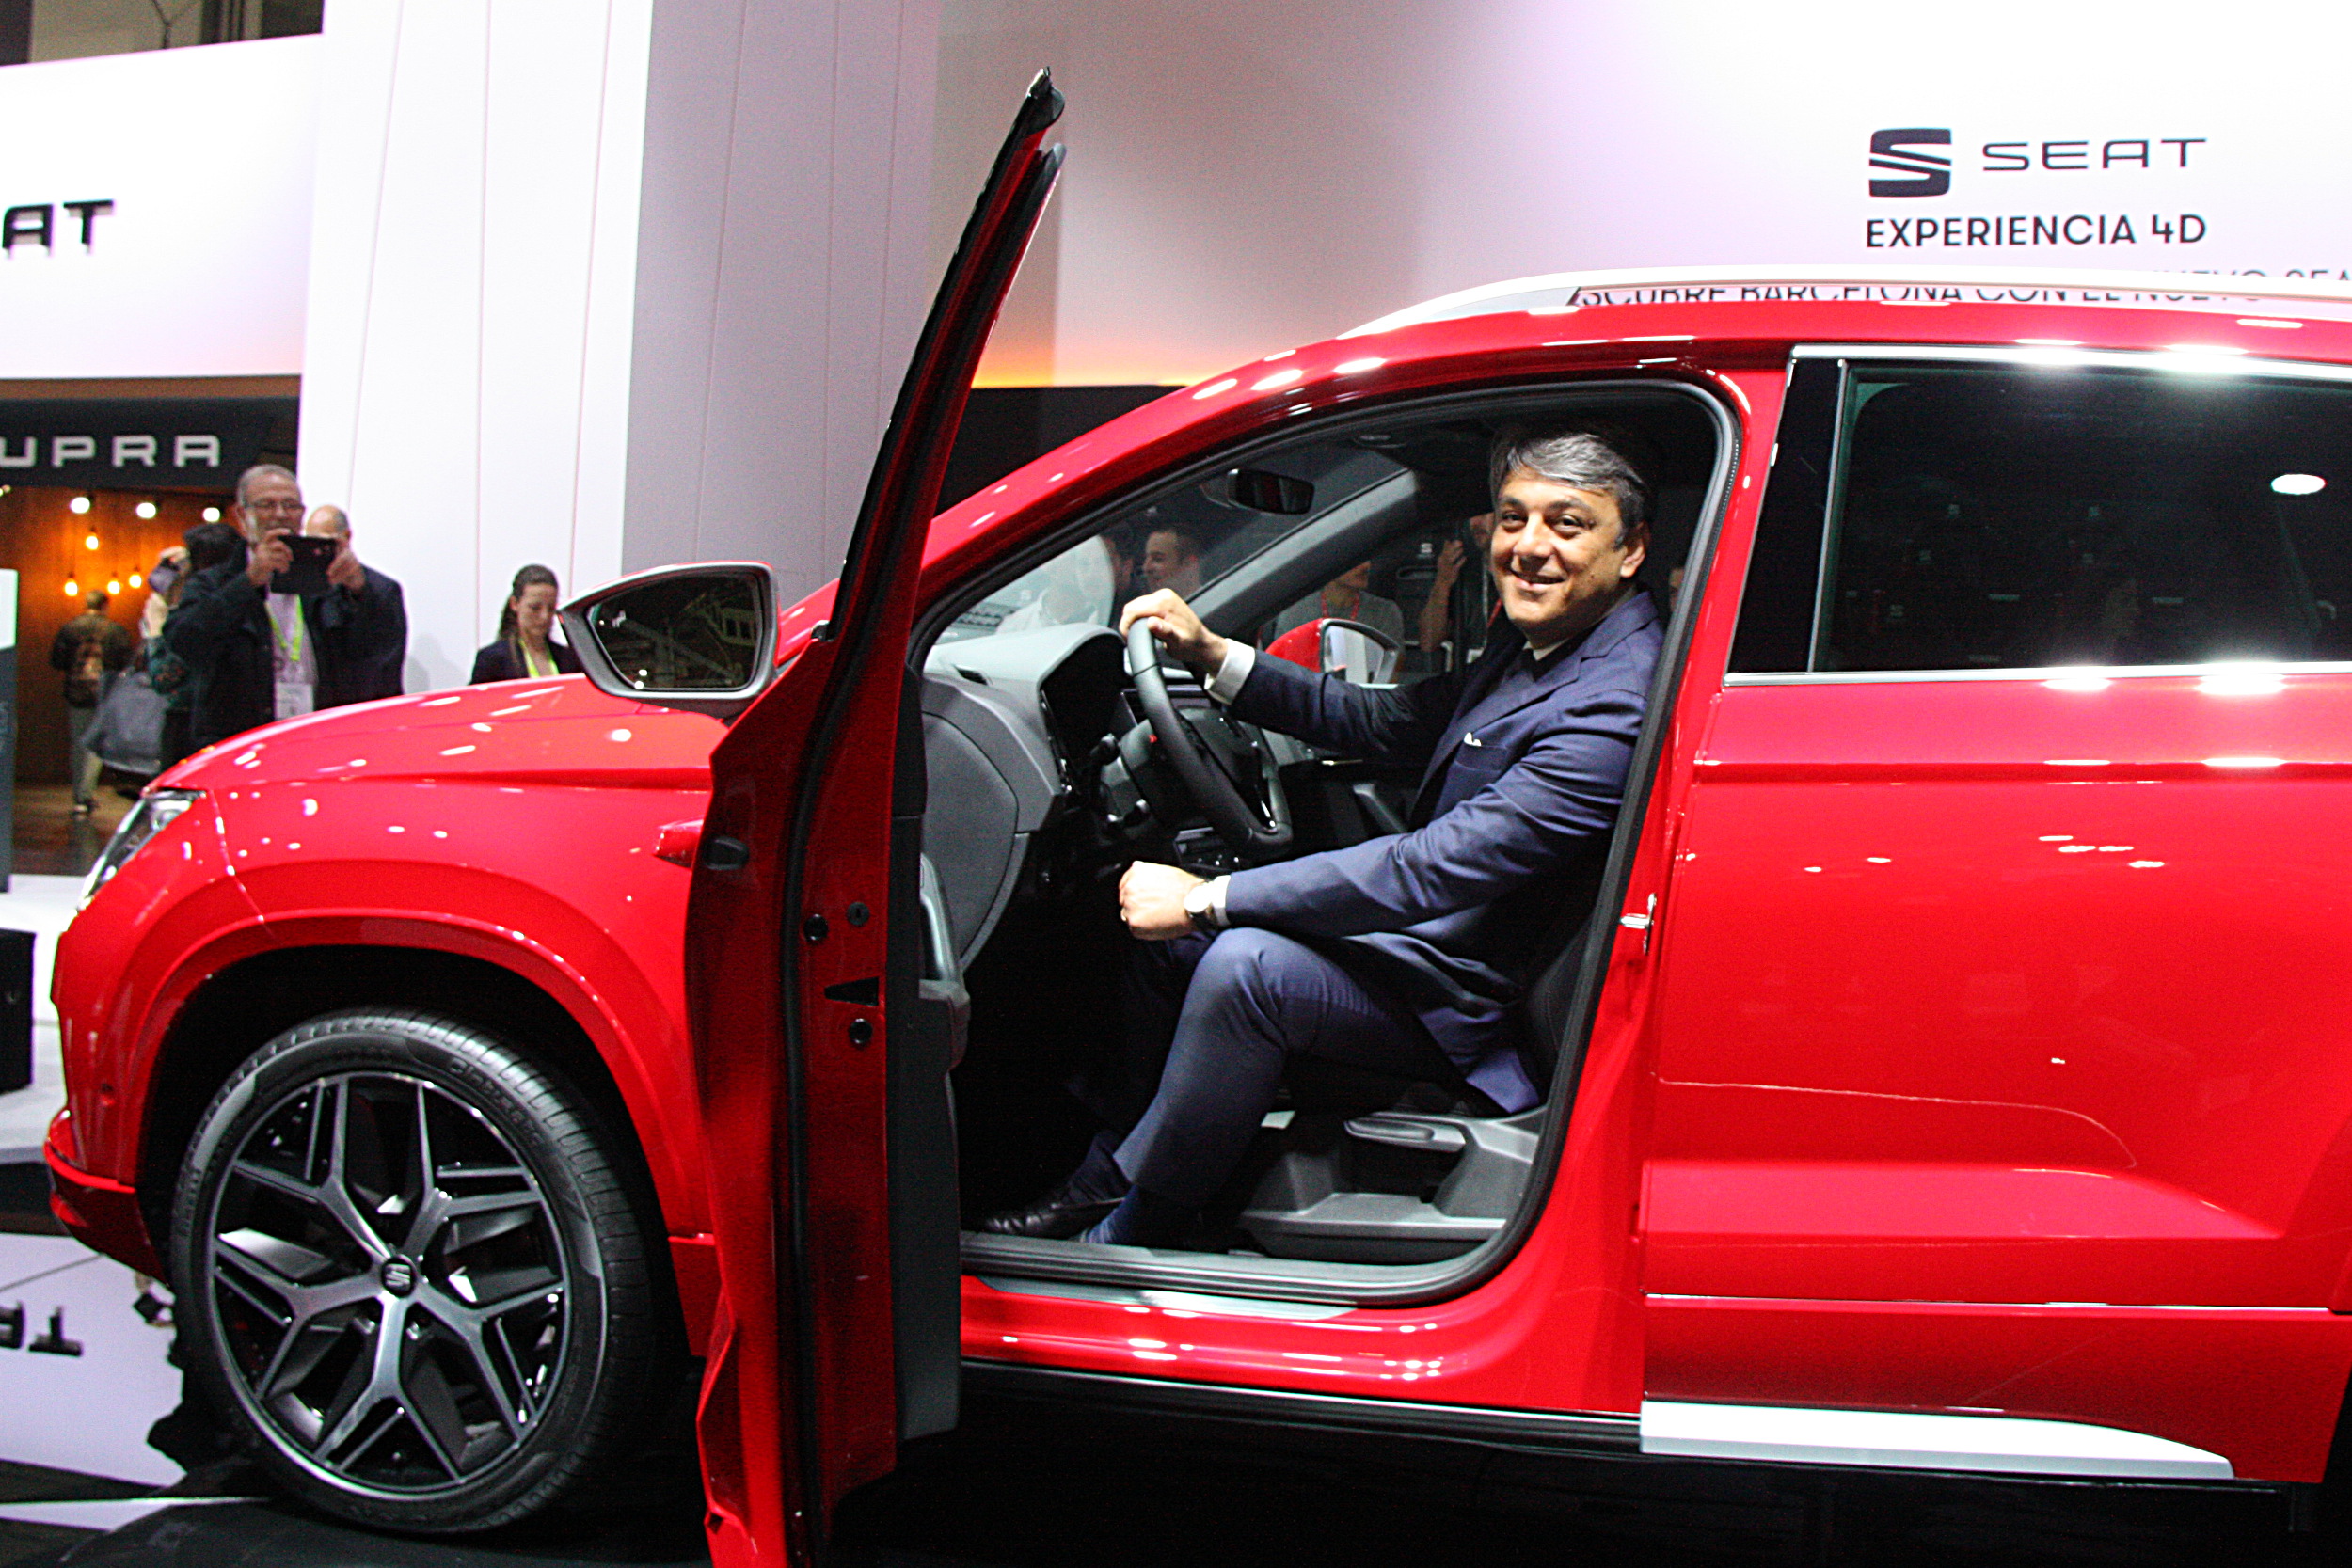 Luca de Meo, president of SEAT, sitting in the company's 'Ateca' model (by ACN)